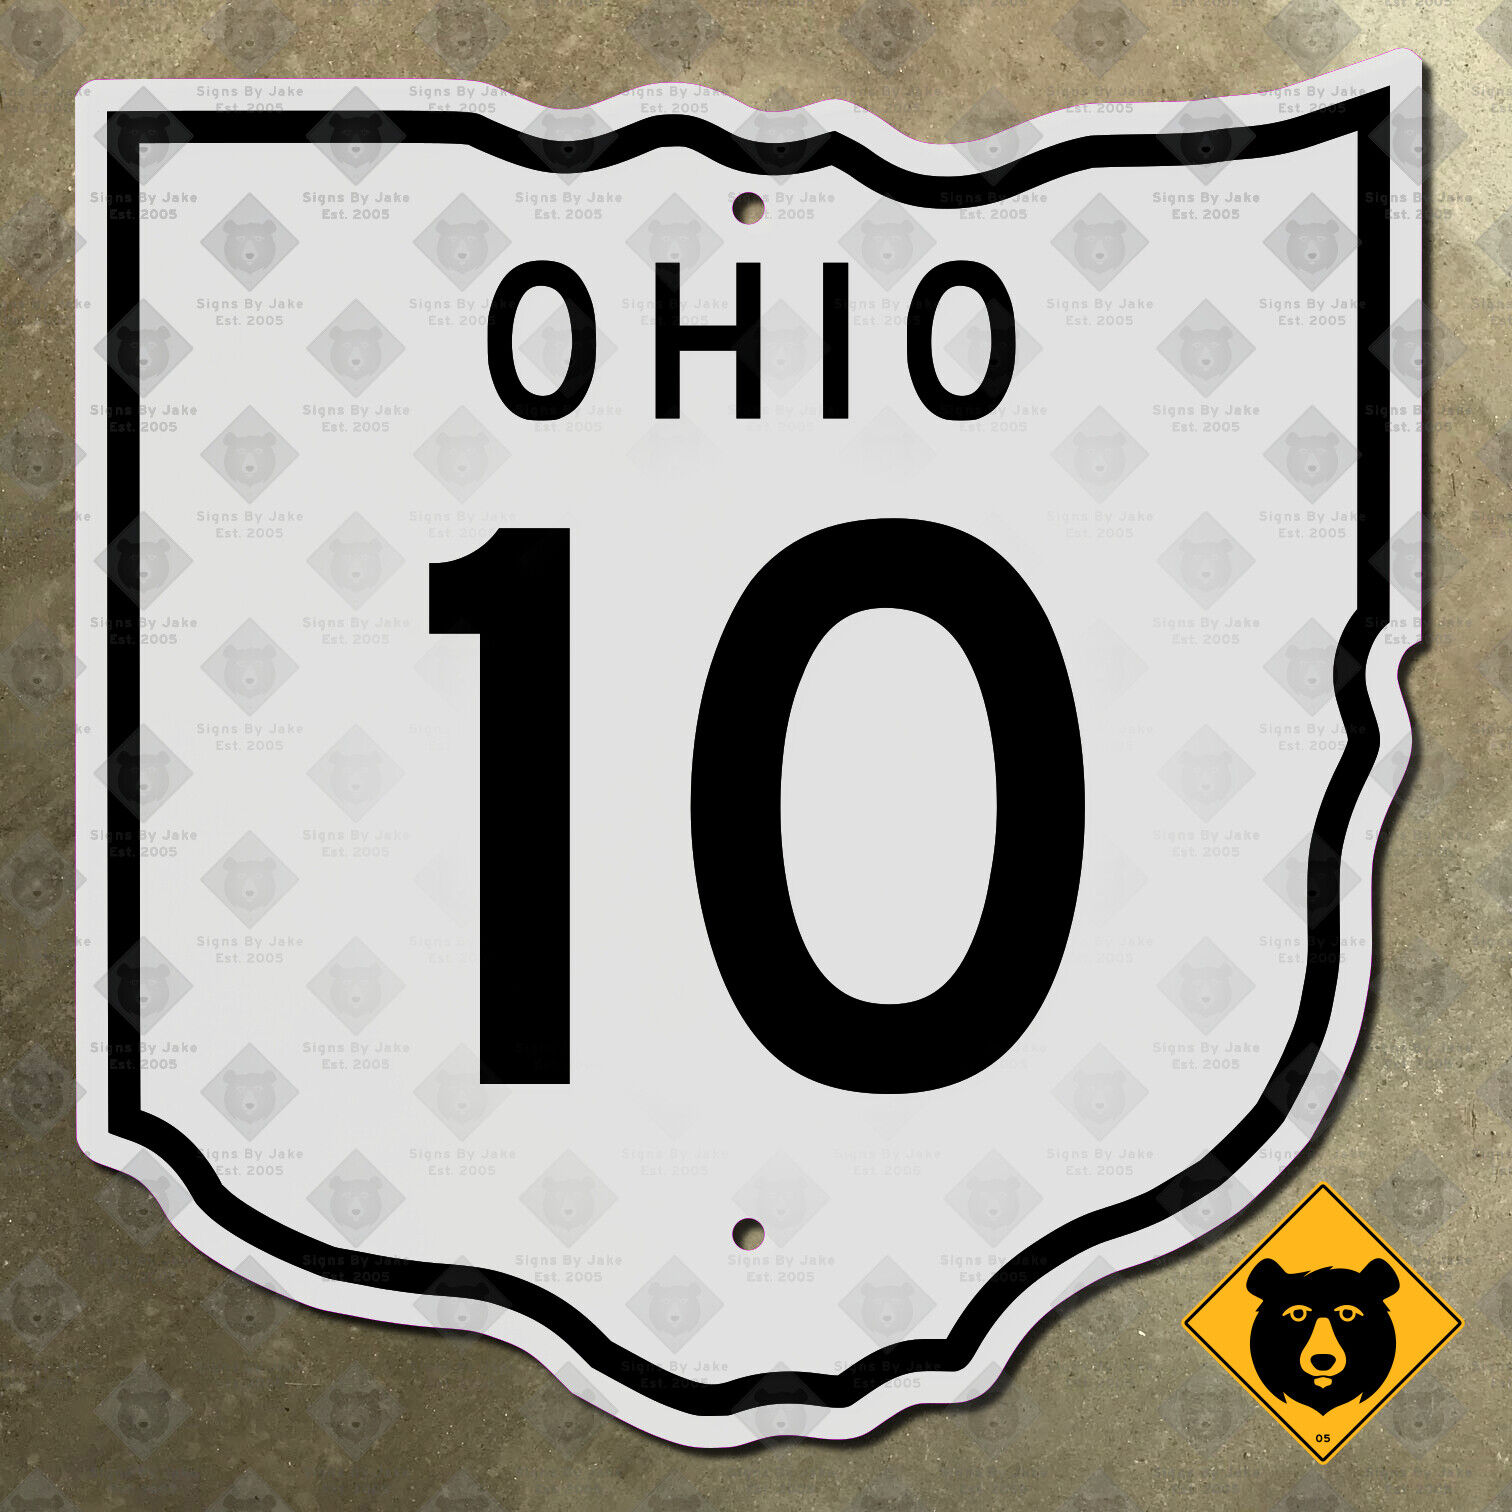 Ohio State Route 10 highway road sign 1952 Cleveland North Ridgeville 11x12